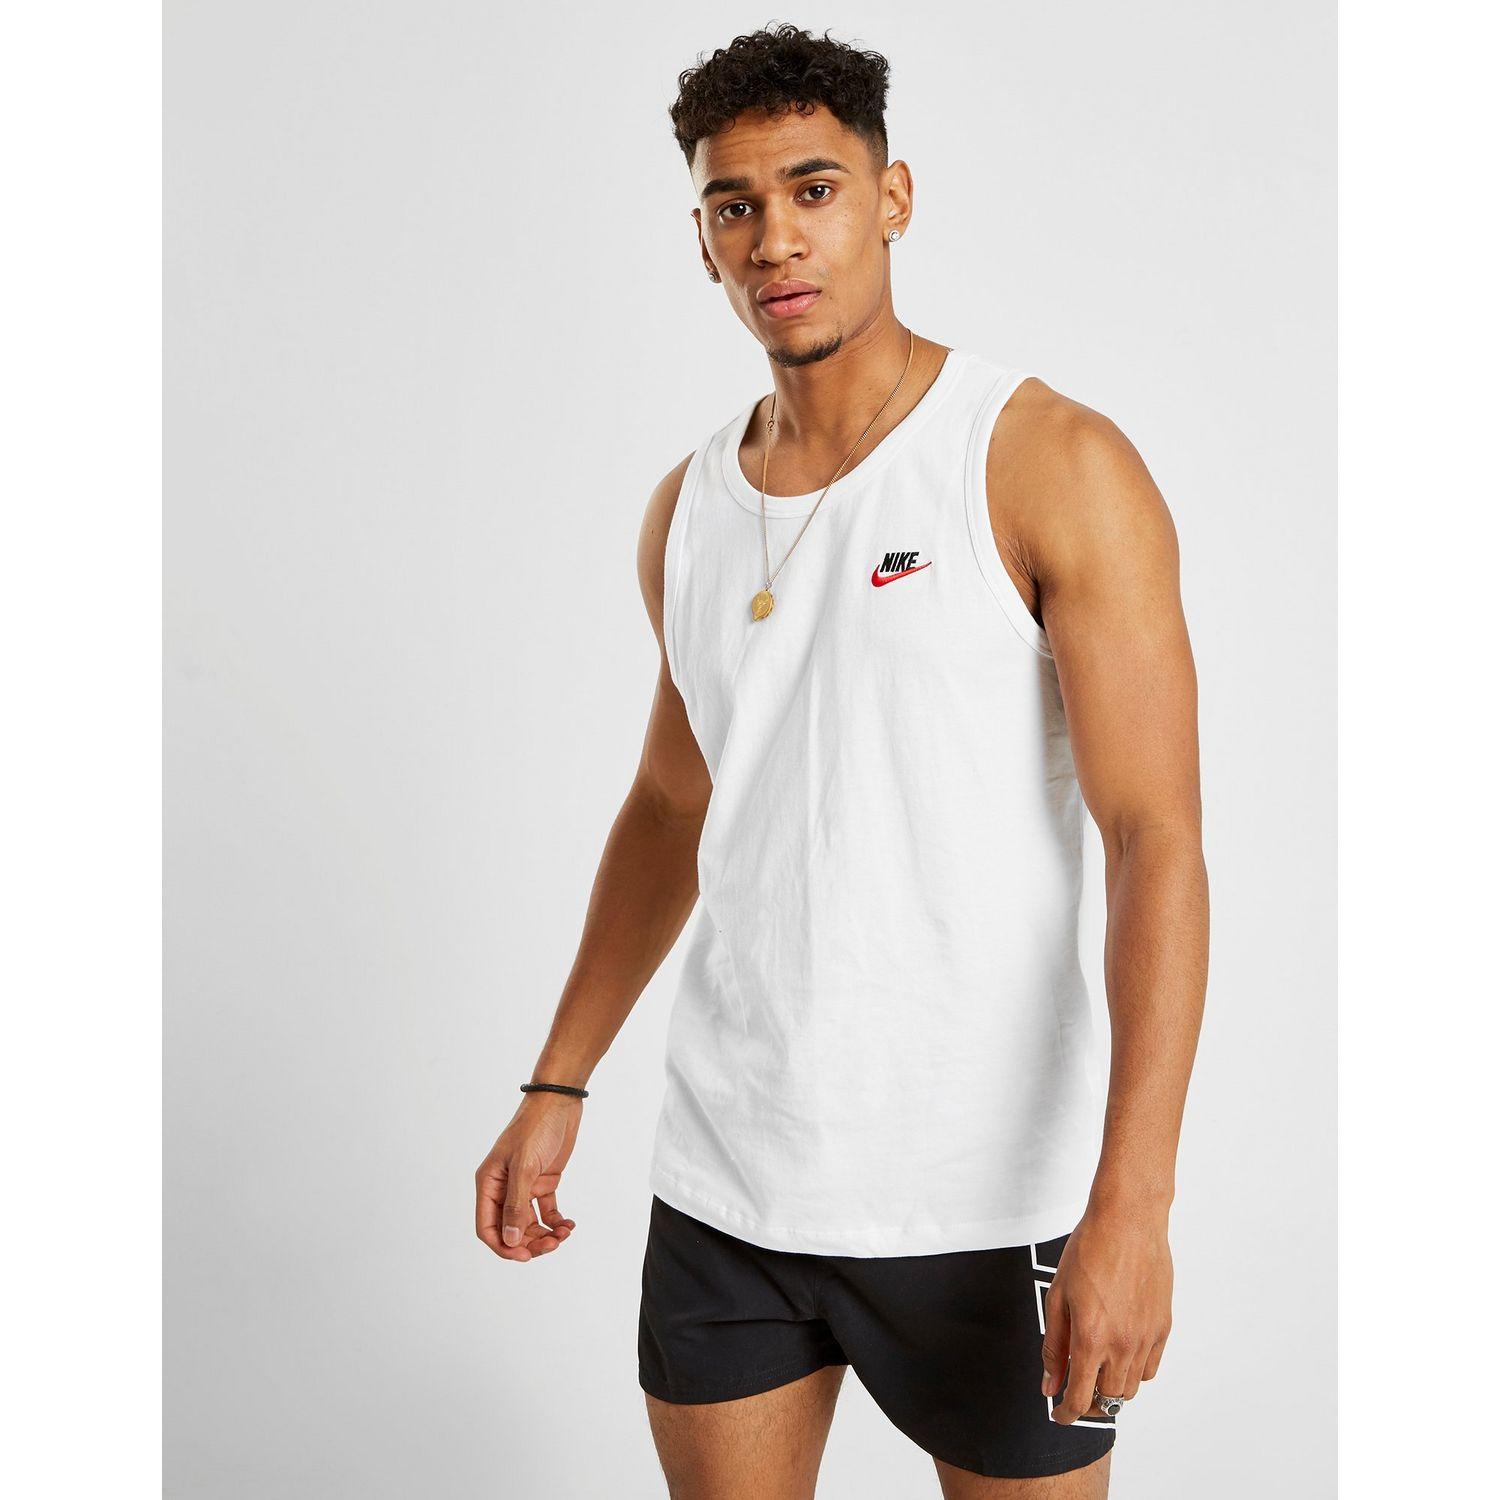 Nike Cotton Foundation Tank Top Vest in 